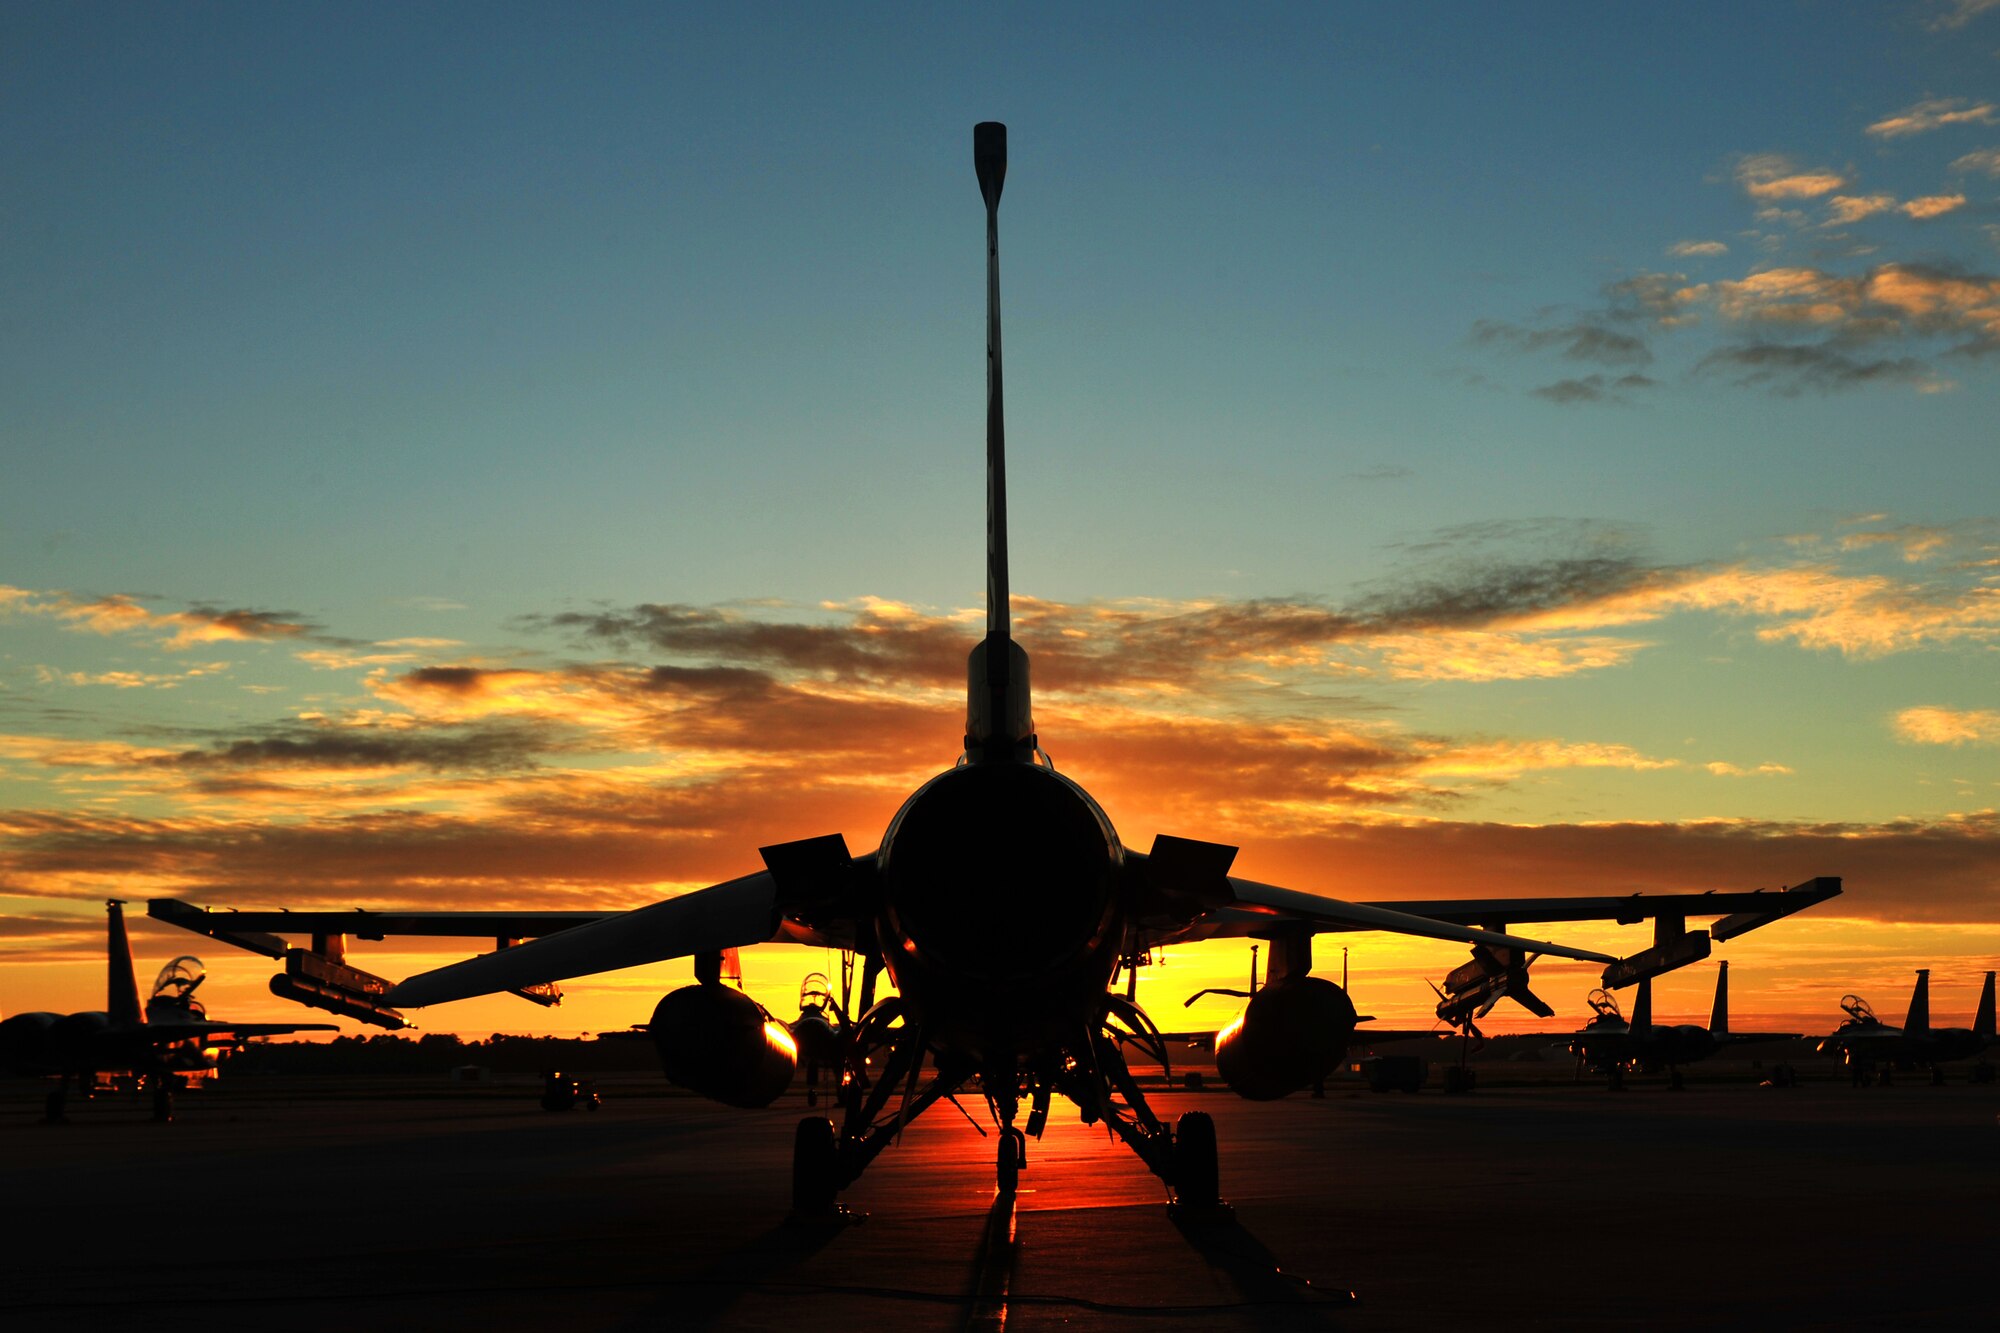 An F-16 Fighting Falcon from the 180th Fighter Wing sits on the flightline at Tyndall Air Force Base, Fla., Sept. 18, before morning sorties. About 120 Airmen from the 180th FW traveled to Tyndall Air Force Base, Fla., to participate in the Combat Archer exercise, a weapons system evaluation program designed to test the effectiveness of our Airmen and air-to-air weapon system capability of our F-16s and other combat aircraft. Training allows our pilots to provide a vital link for the defense of our country. Air National Guard photo by Senior Master Sgt. Beth Holliker/Released